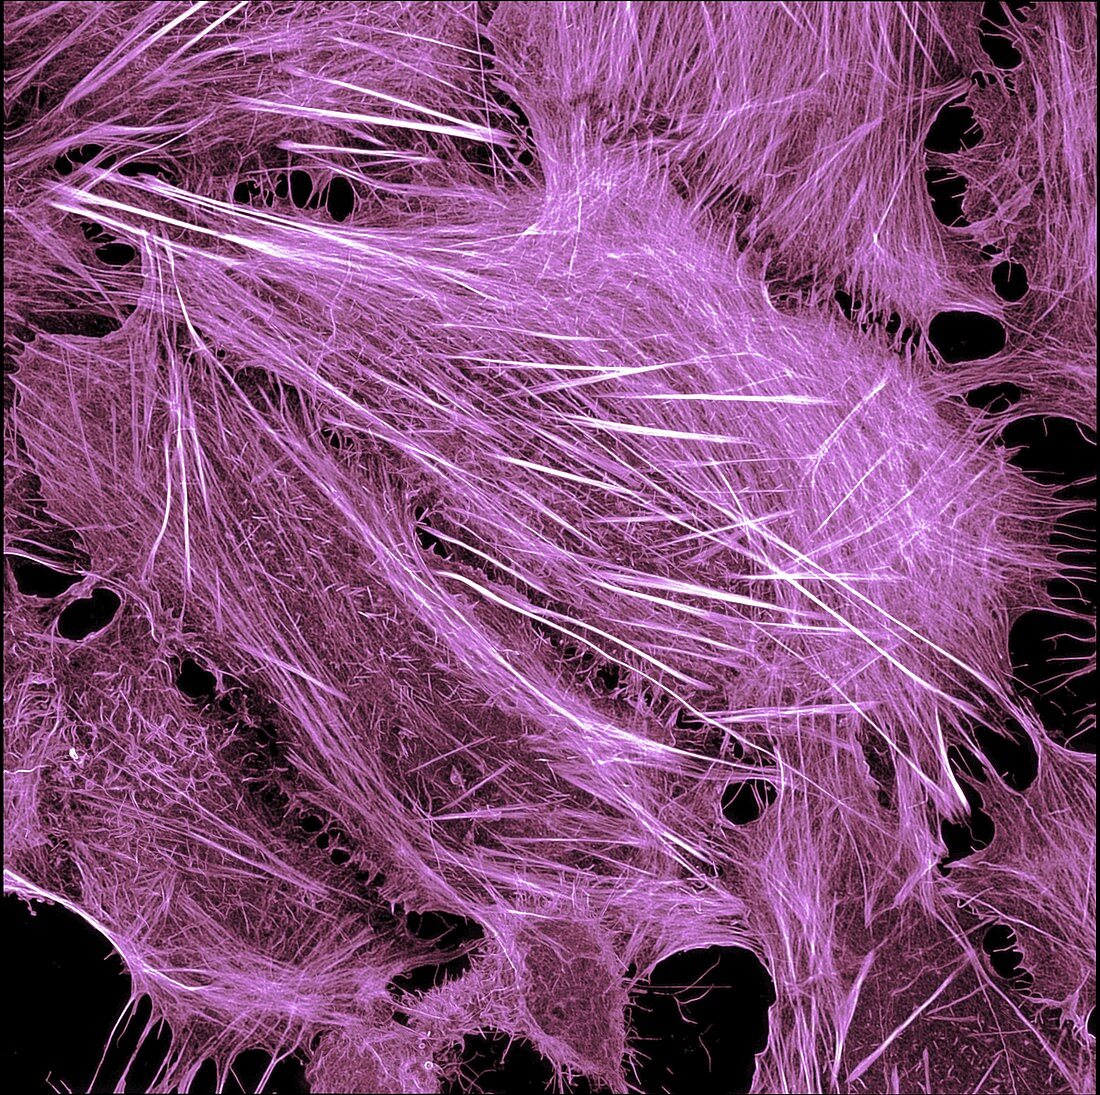 Cancer cell showing actin cytoskeleton, light micrograph